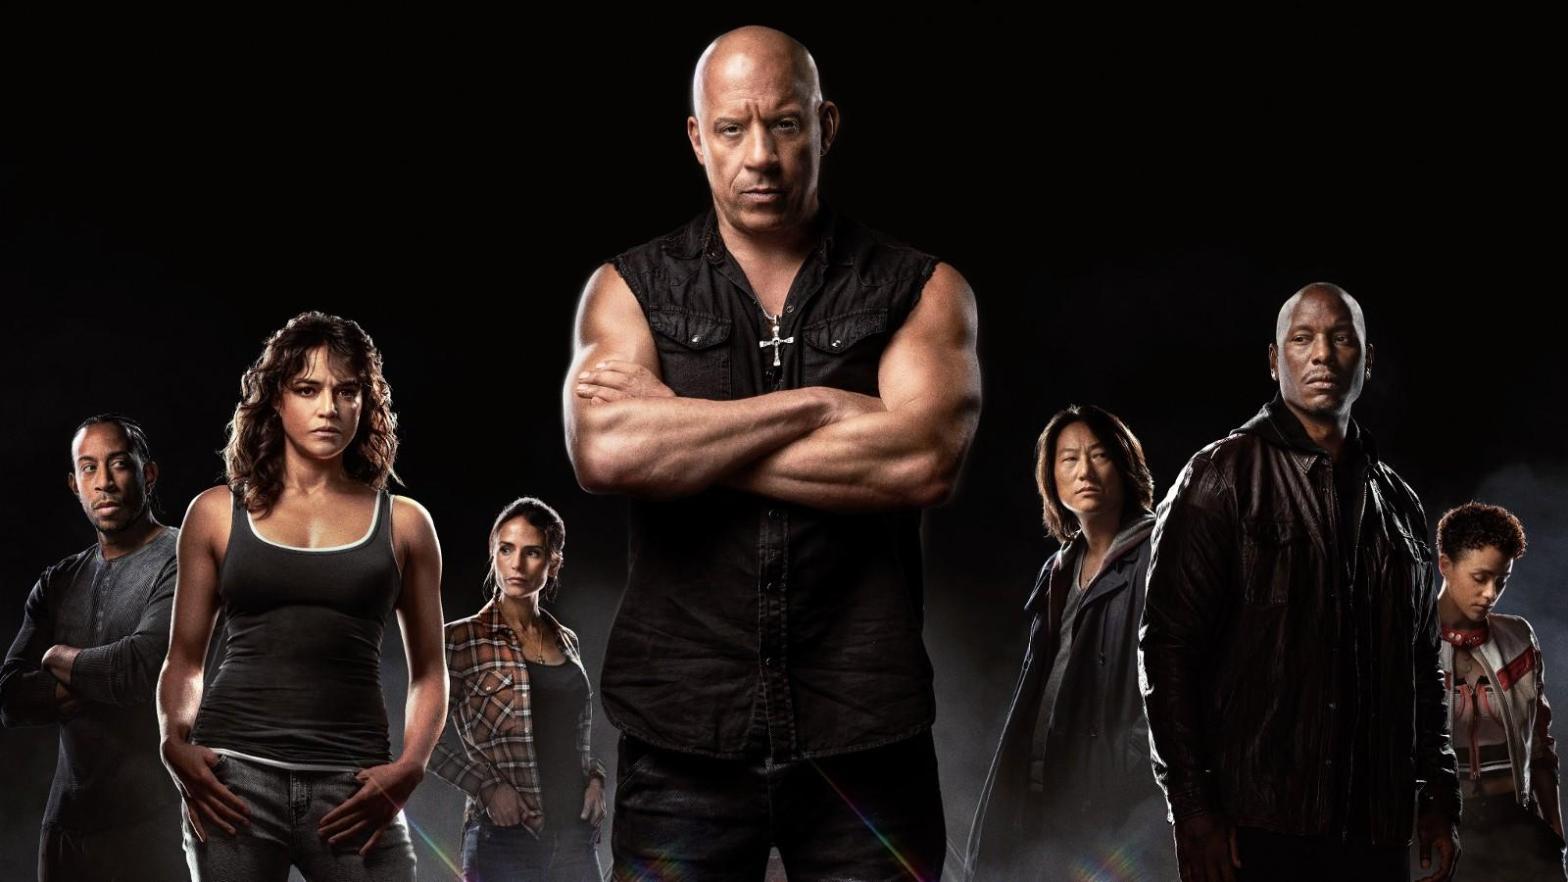 Vin Diesel’s Sticking With Fast & Furious All the Way to The End